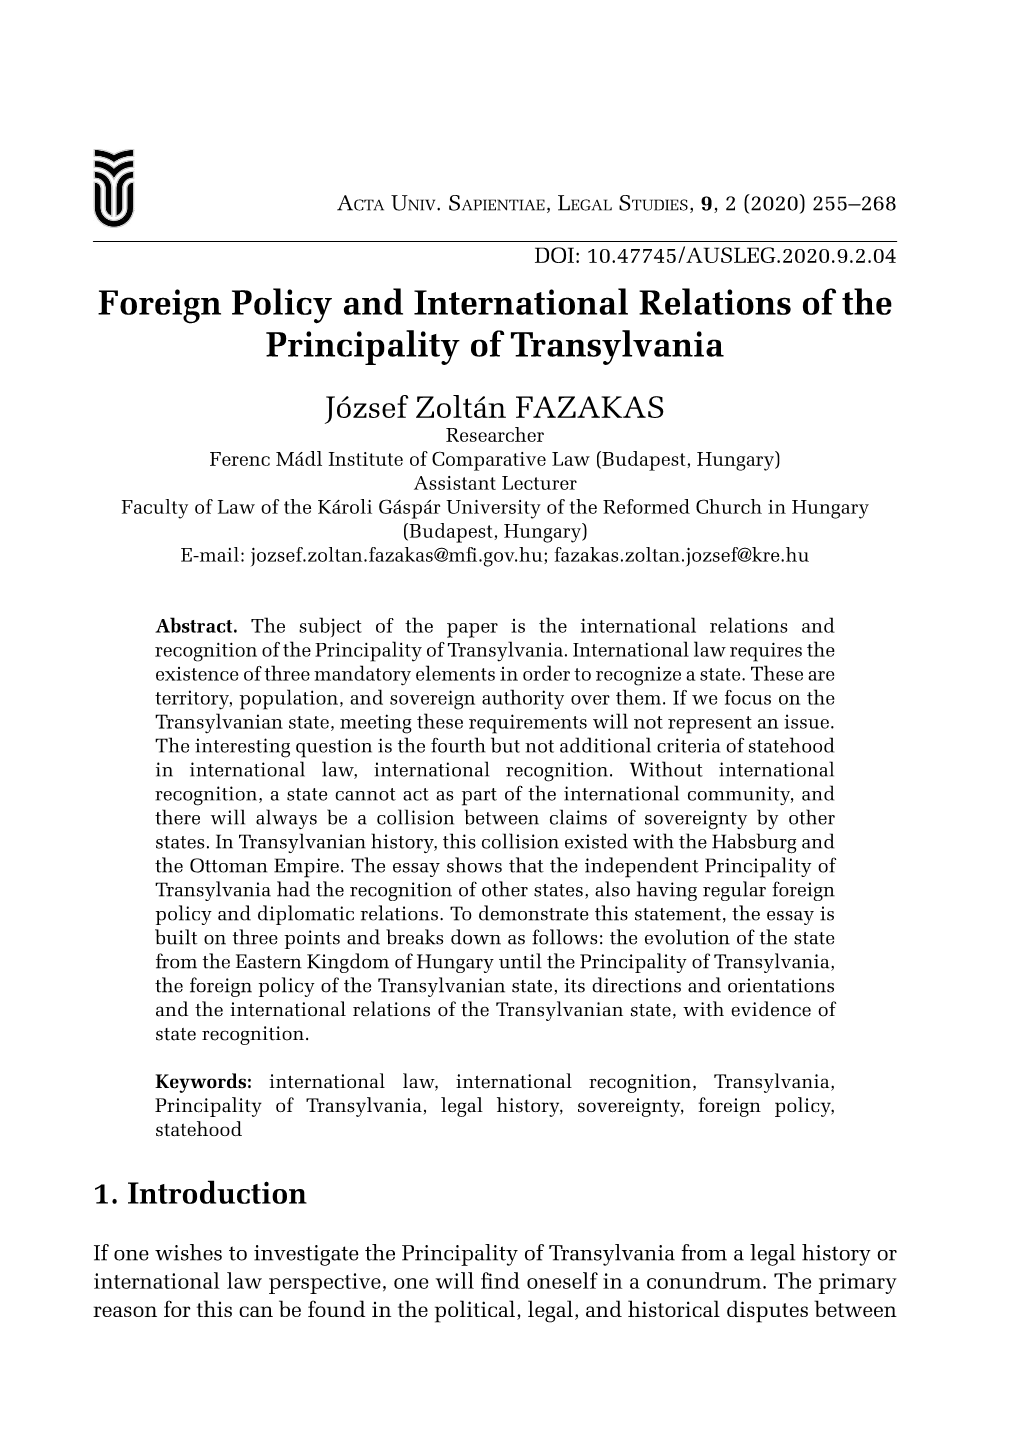 Foreign Policy and International Relations of the Principality Of